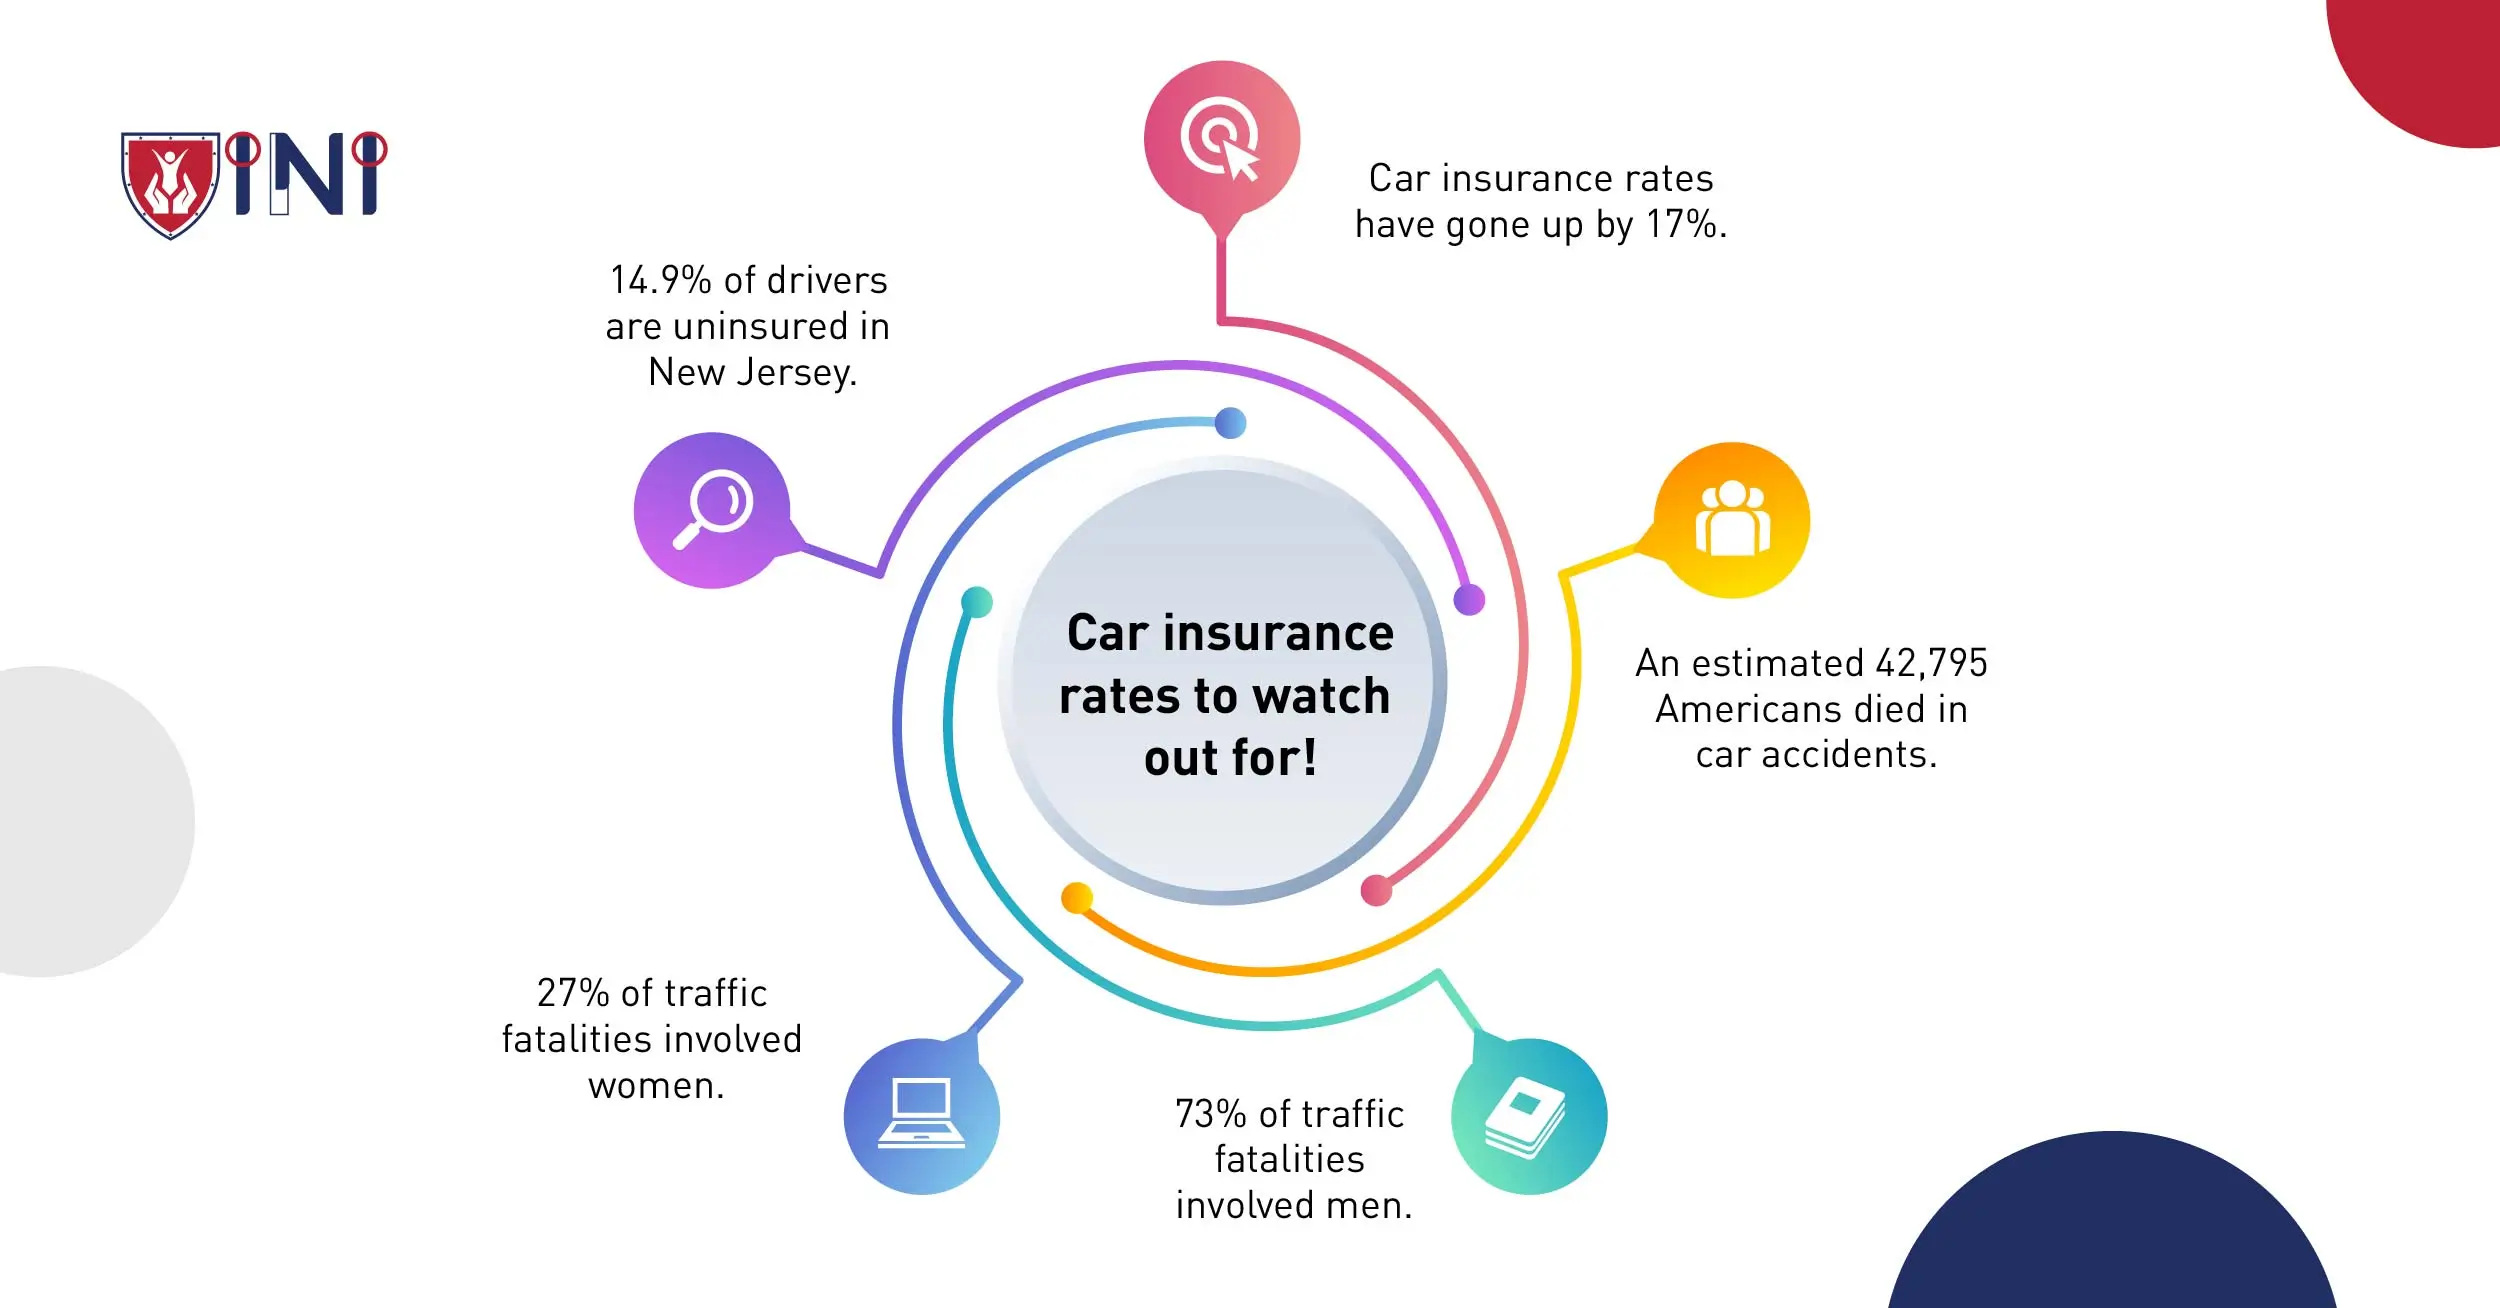 Car insurance rates to watch out for!